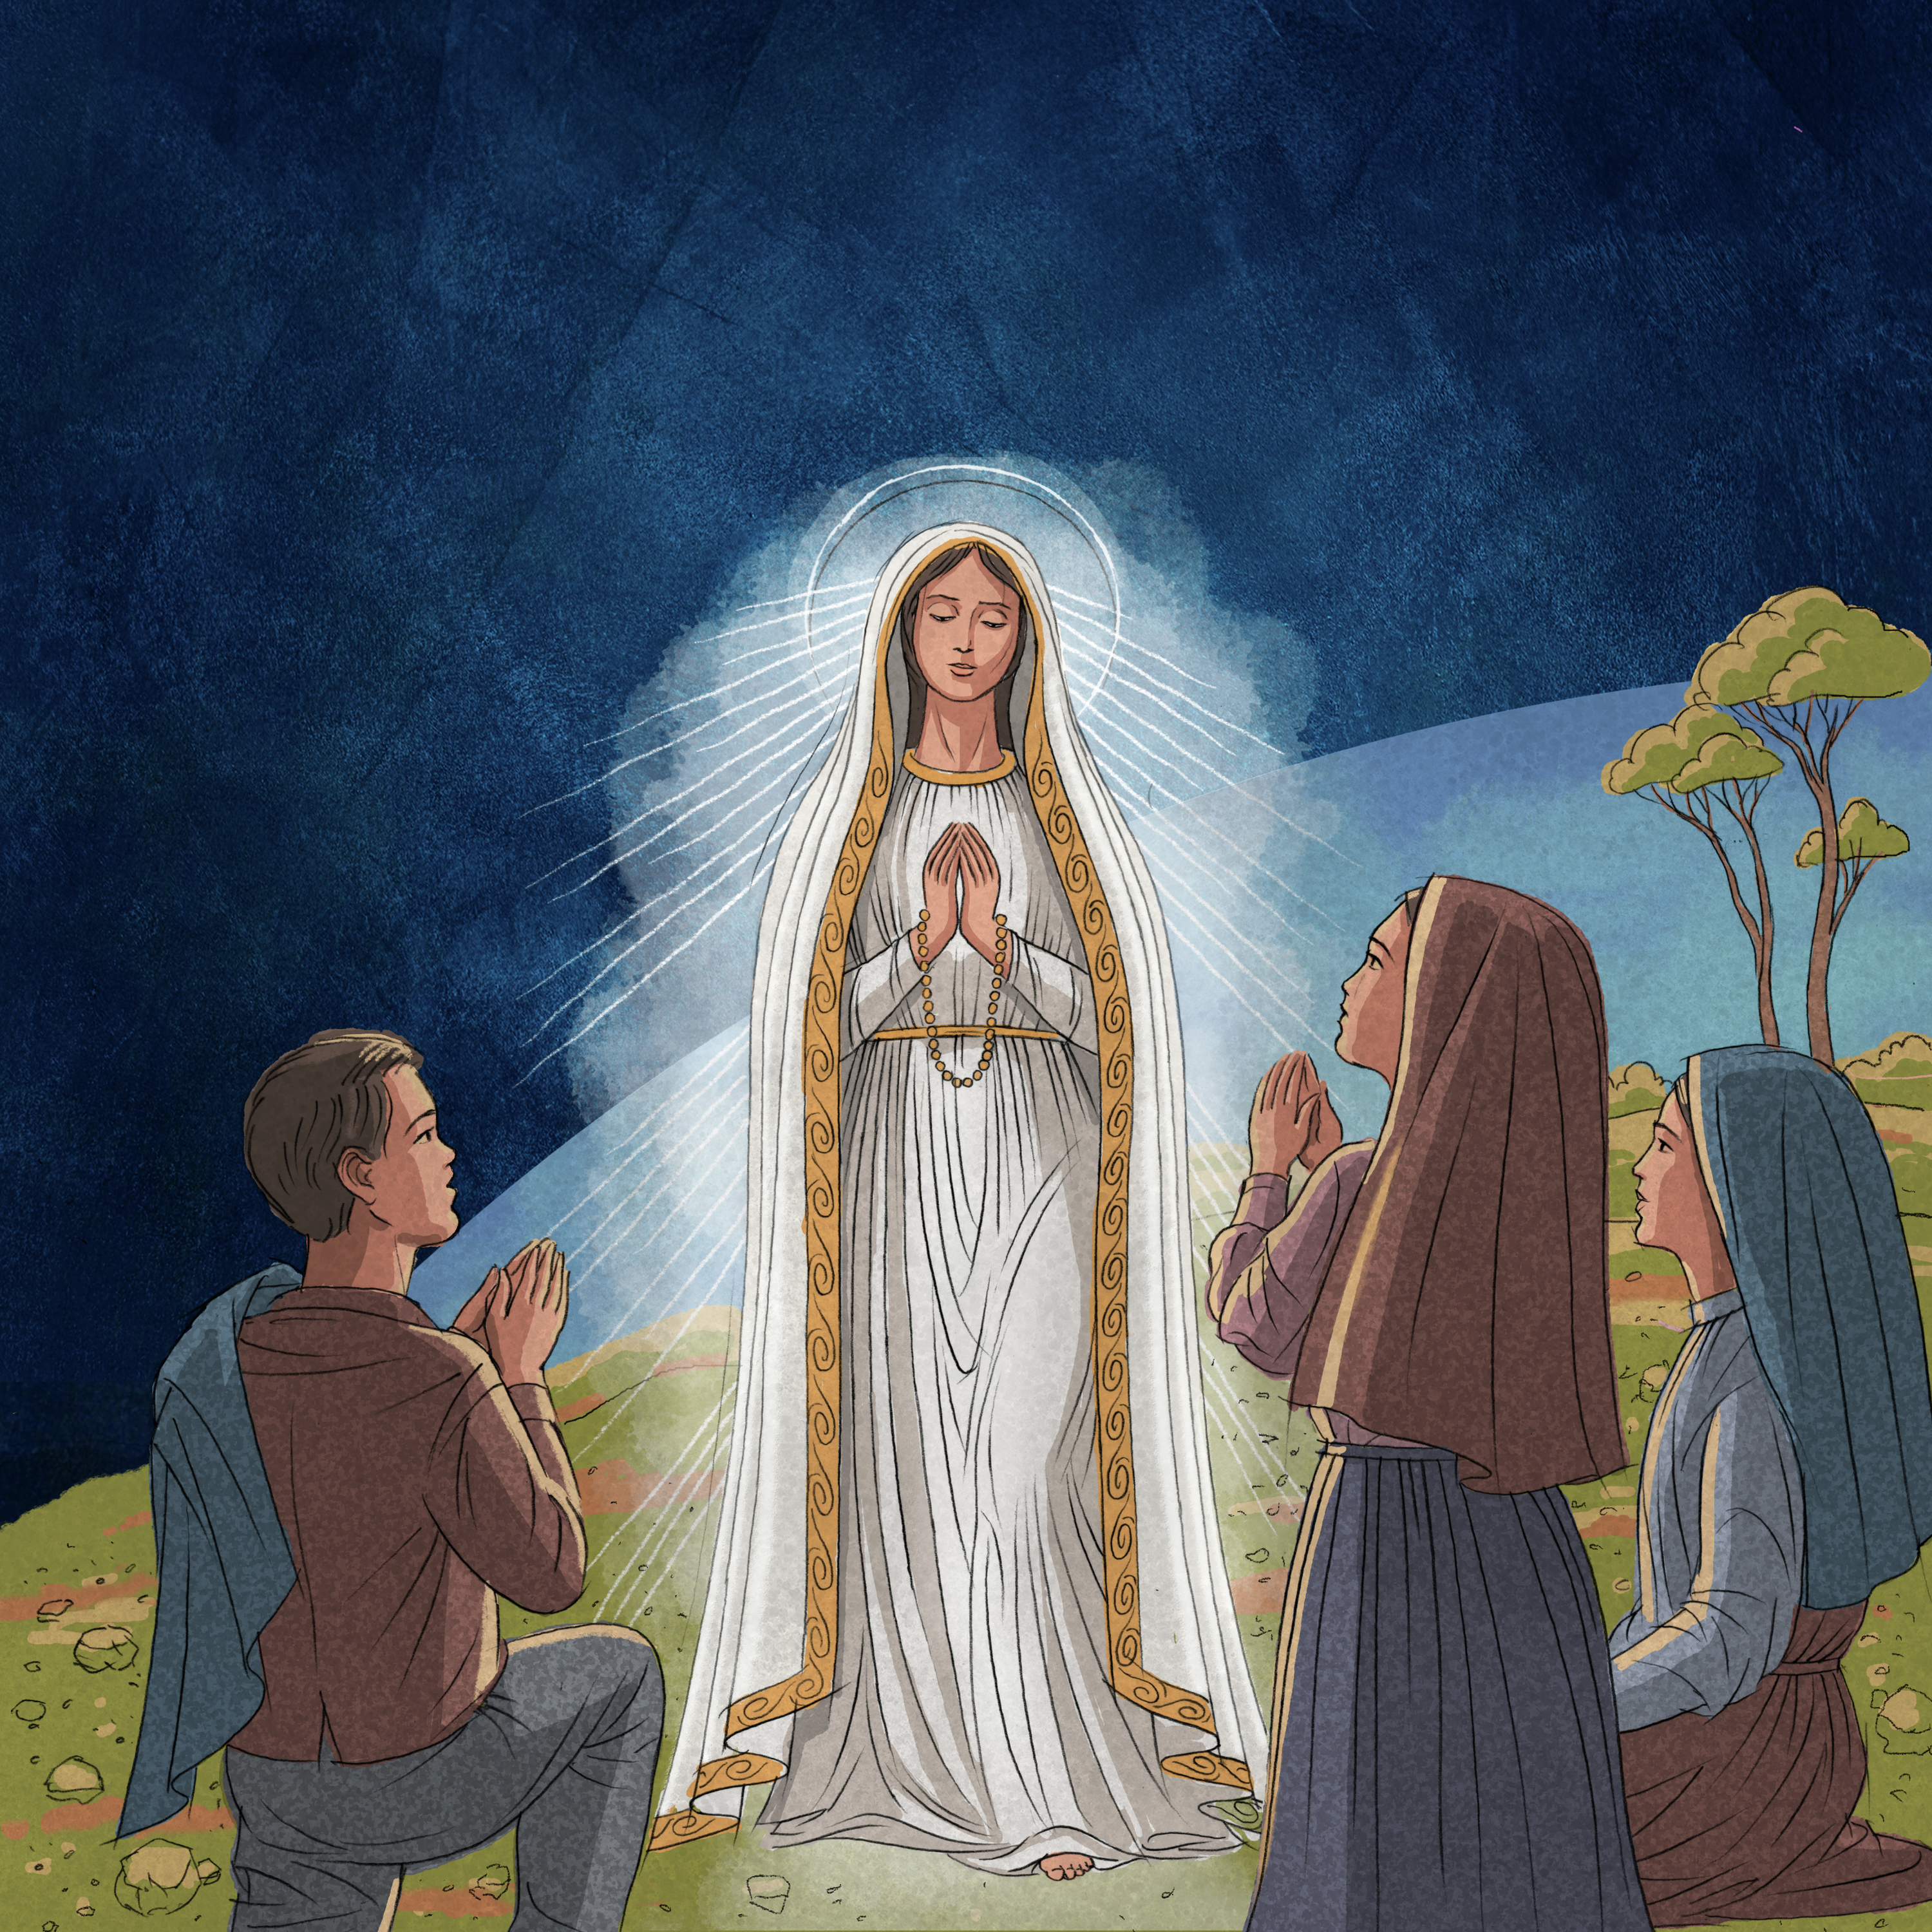 Our Lady of Fatima Episode 1 (The Saints: Adventures of Faith and Courage)